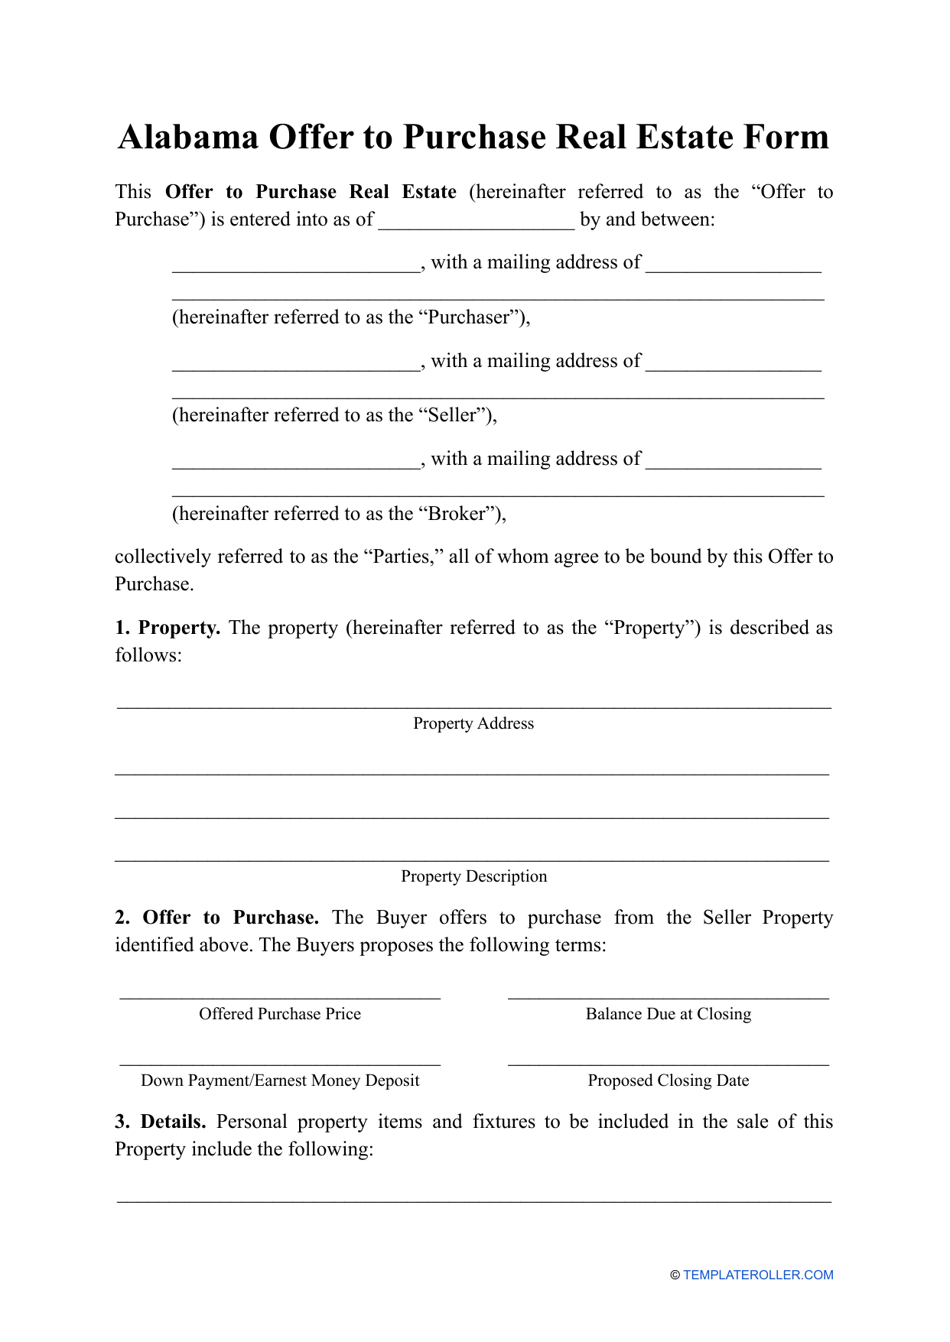 Offer to Purchase Real Estate Form - Alabama, Page 1